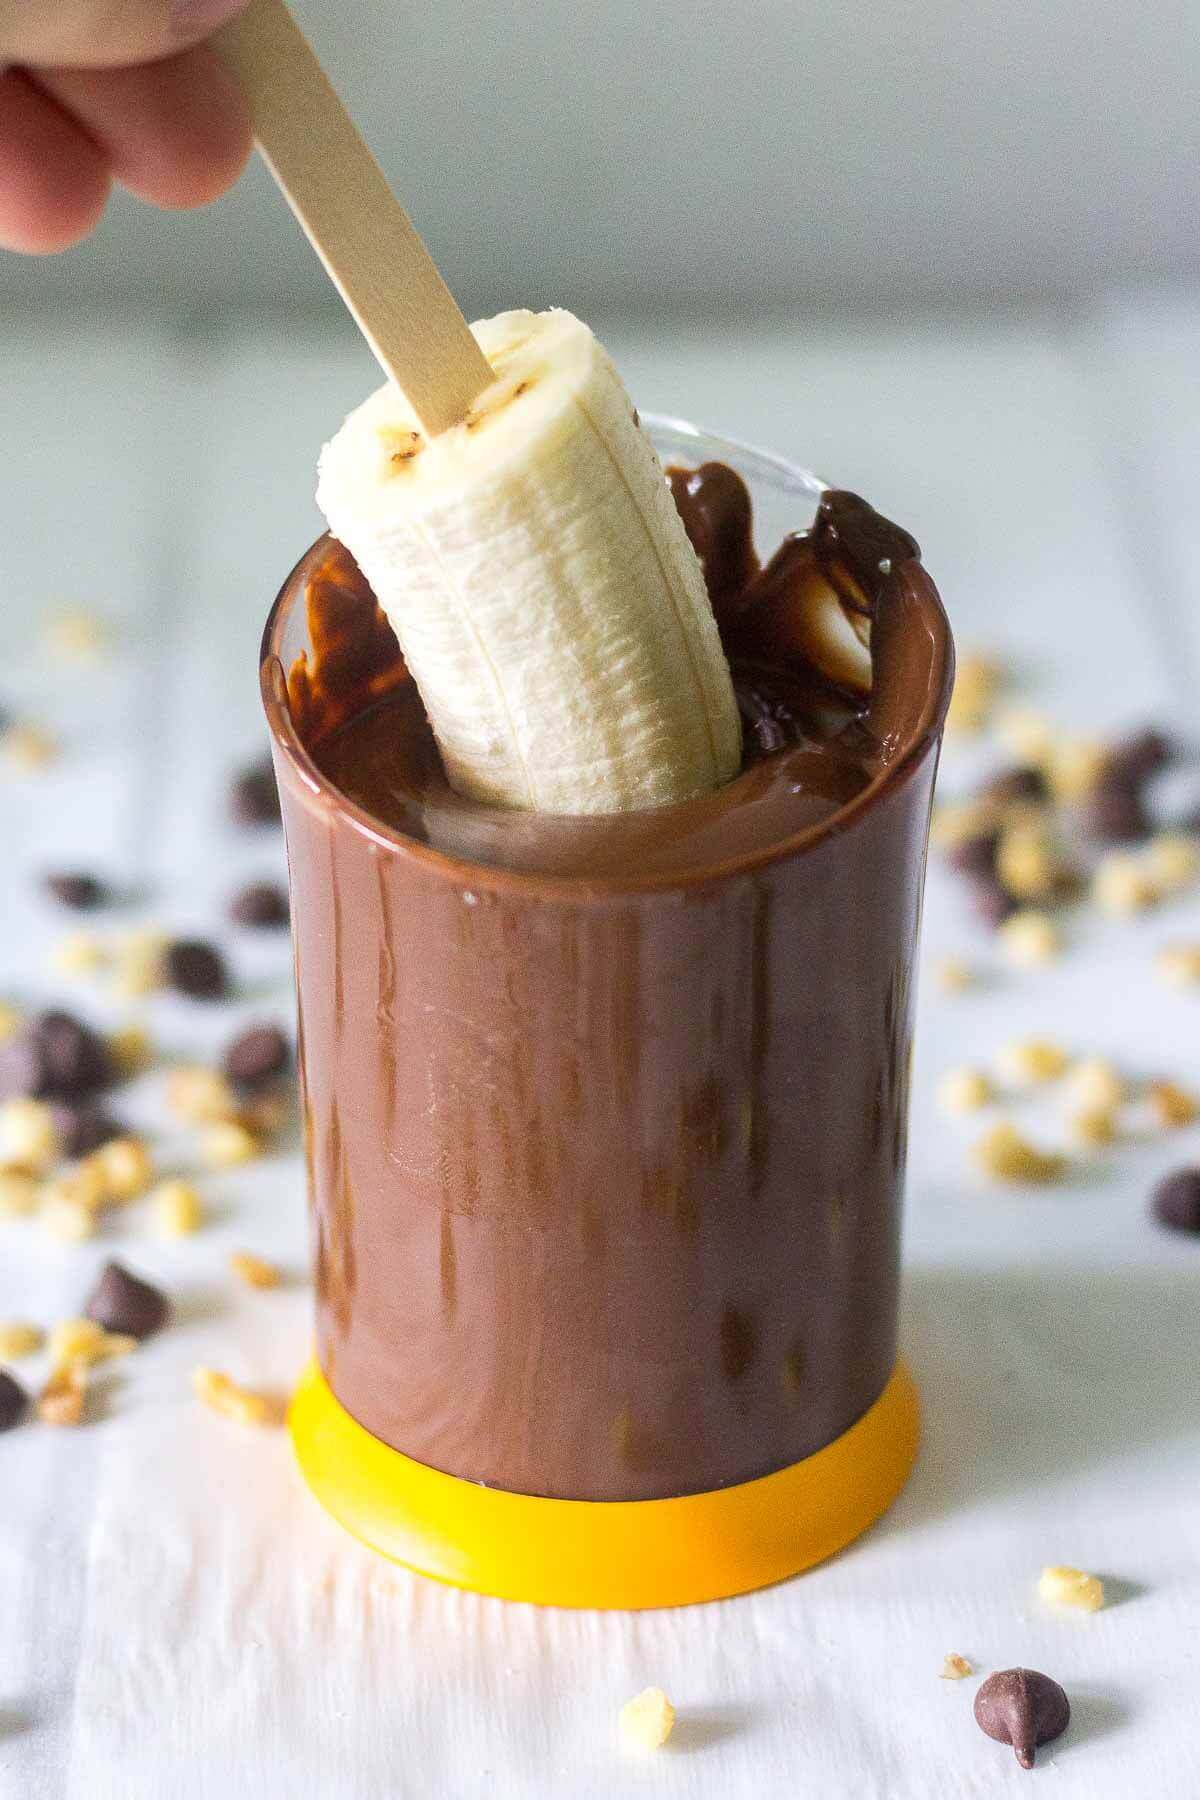 This healthy frozen treat is a guaranteed crowd pleaser! You're going to flip for how easy they are to make and all of the natural, healthy ingredients you use to make them. Make a bunch of these paleo frozen bananas and keep them in the freezer for whenever you and your family need a sweet (but healthy) dessert.